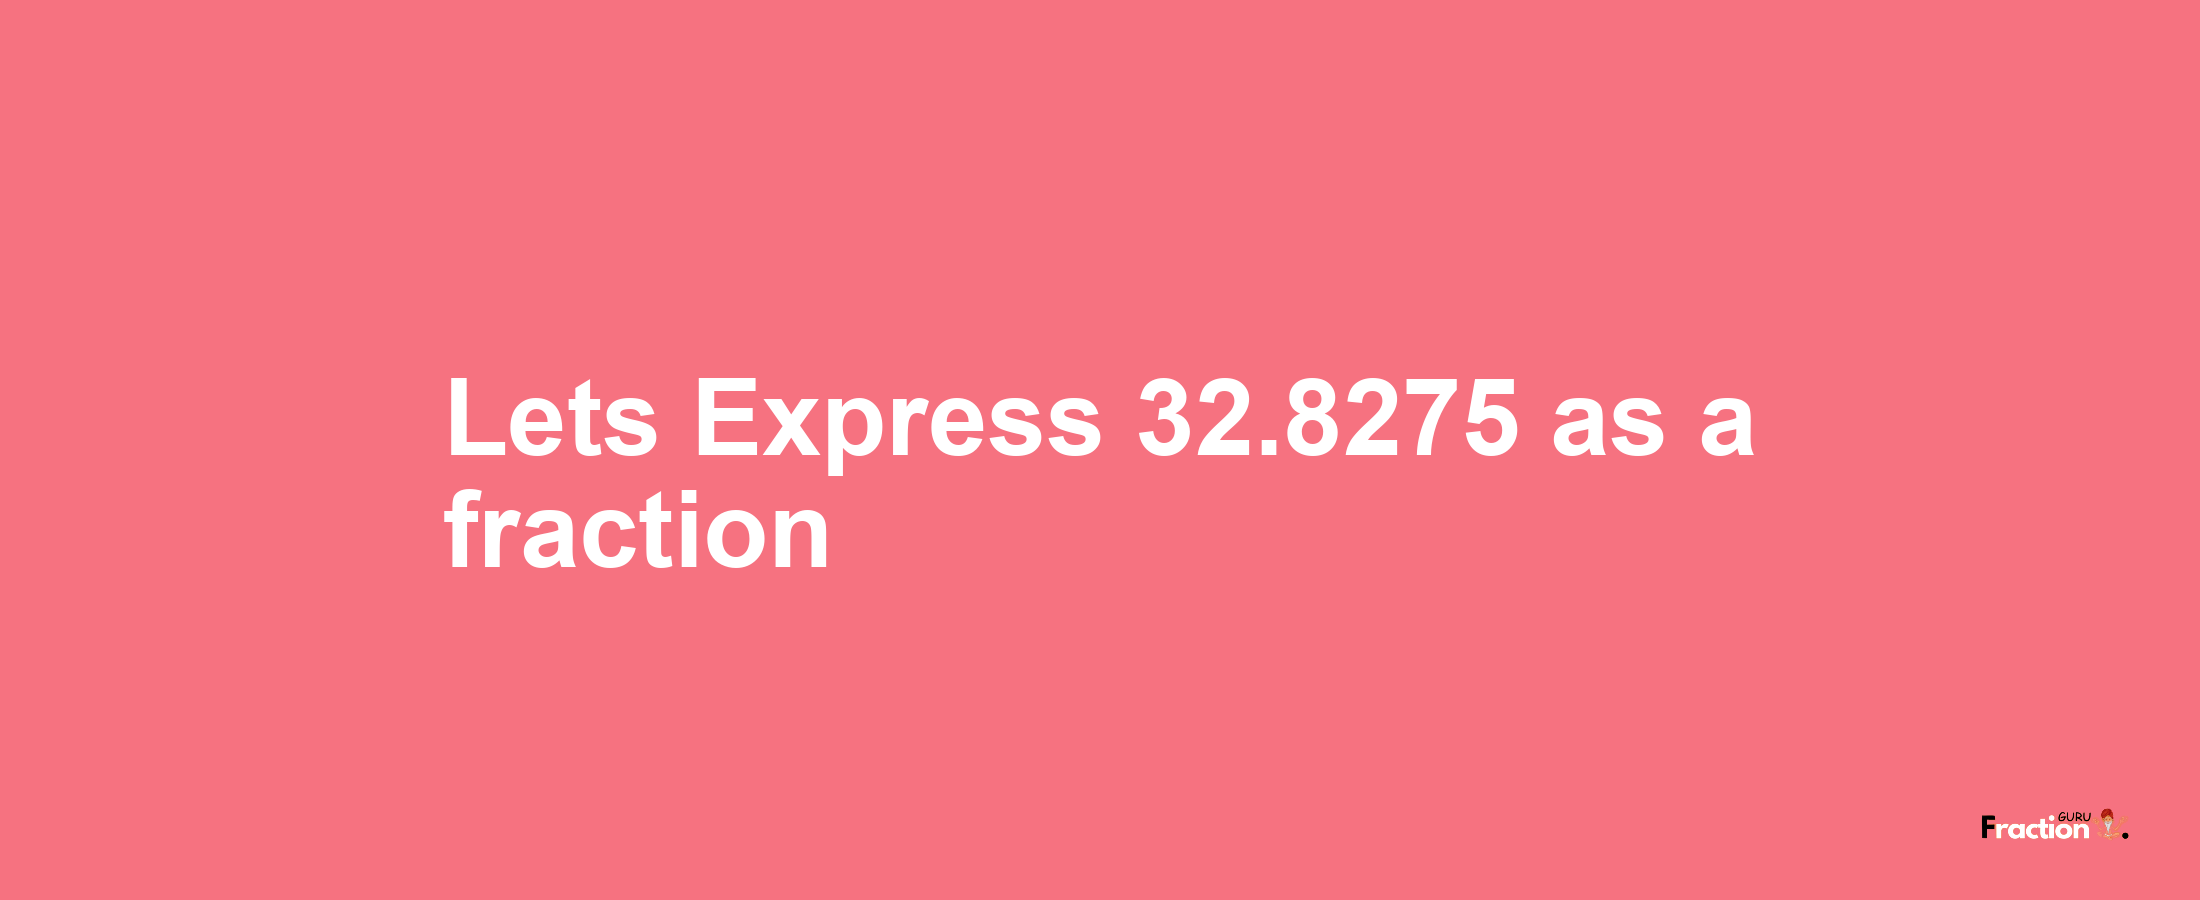 Lets Express 32.8275 as afraction